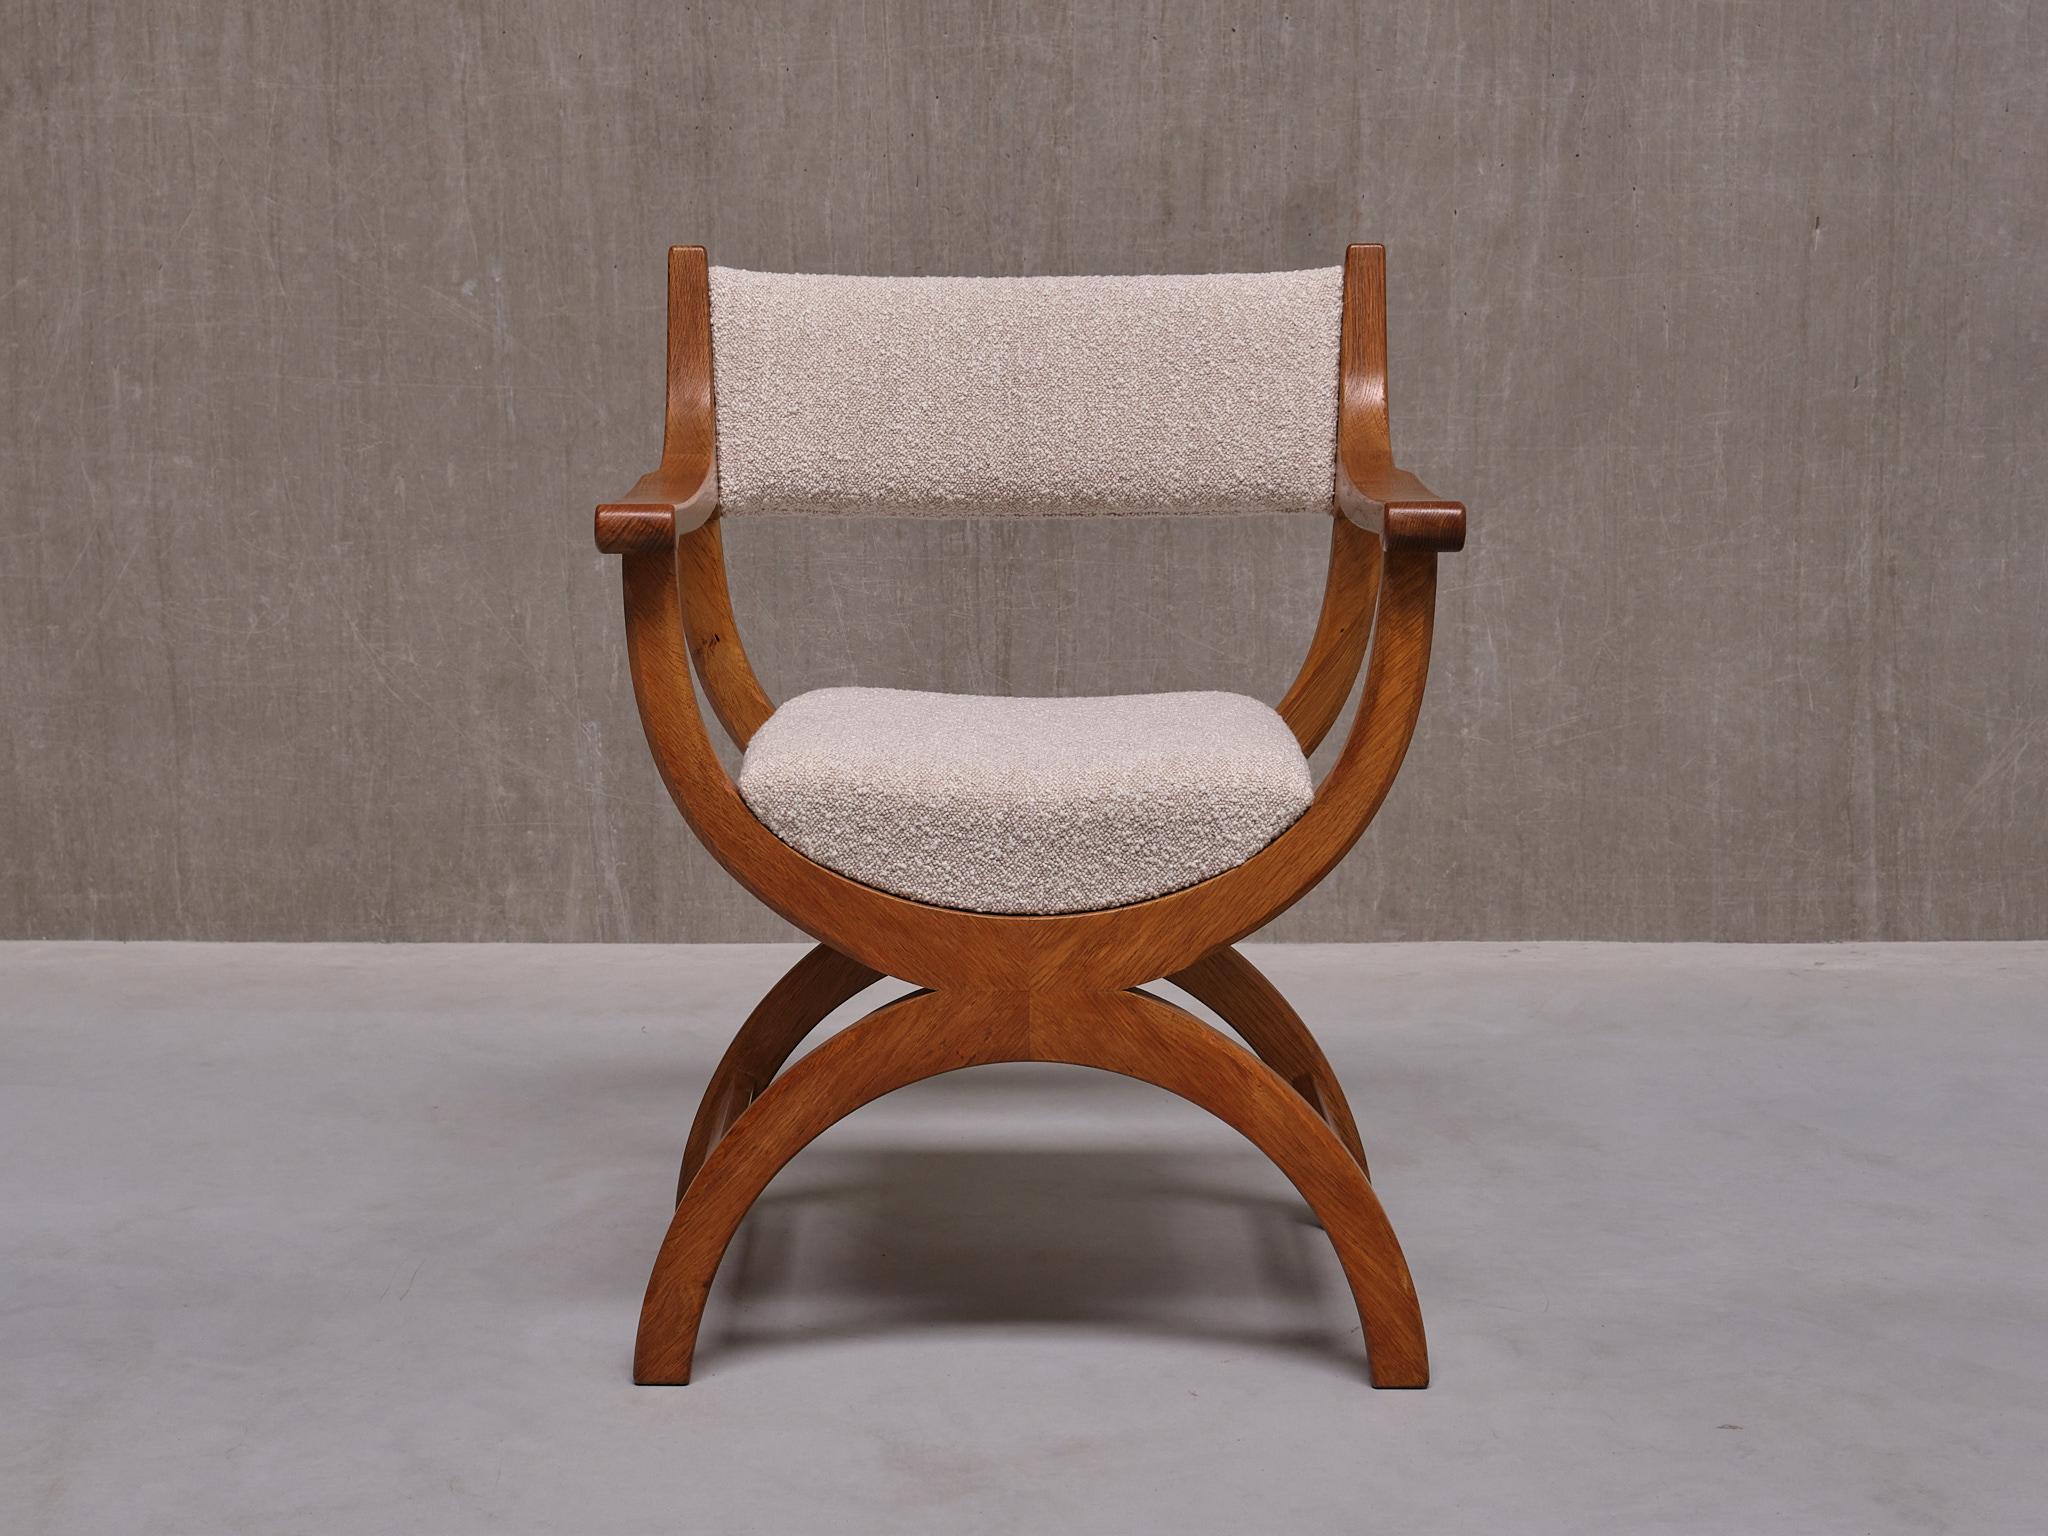 This striking armchair was designed by Henning (Henry) Kjærnulf in the 1960s. This particular model named 'Kurul' was produced by EG Kvalitetsmøbel in Denmark.

This armchair in solid oak blends the classic kurul design with rounded, curved